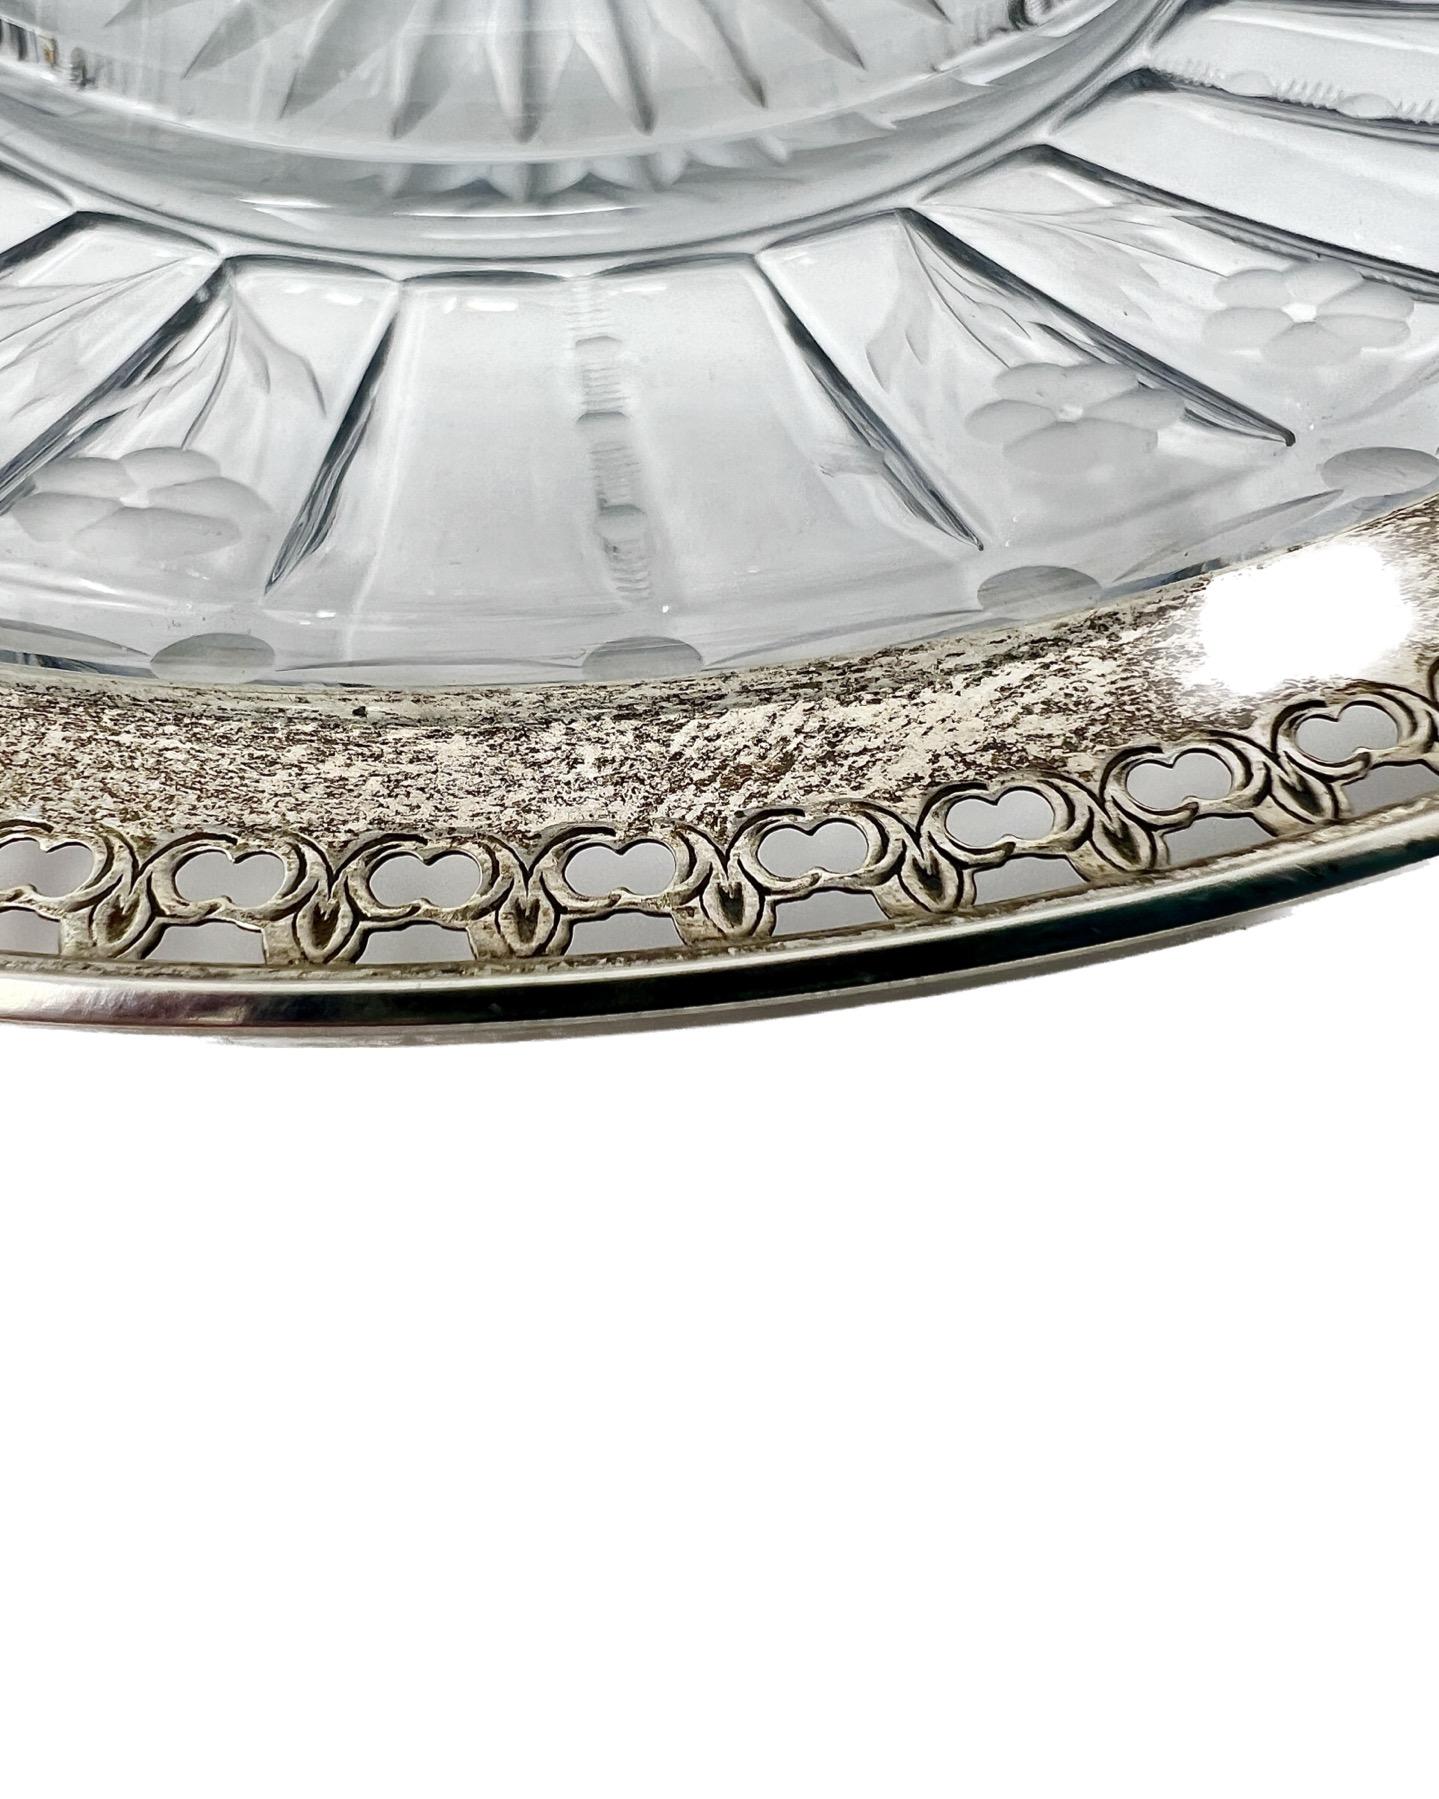 Antique Cut Crystal and Silver Edged Caviar Dish with Cover, Circa 1910-1920. For Sale 2